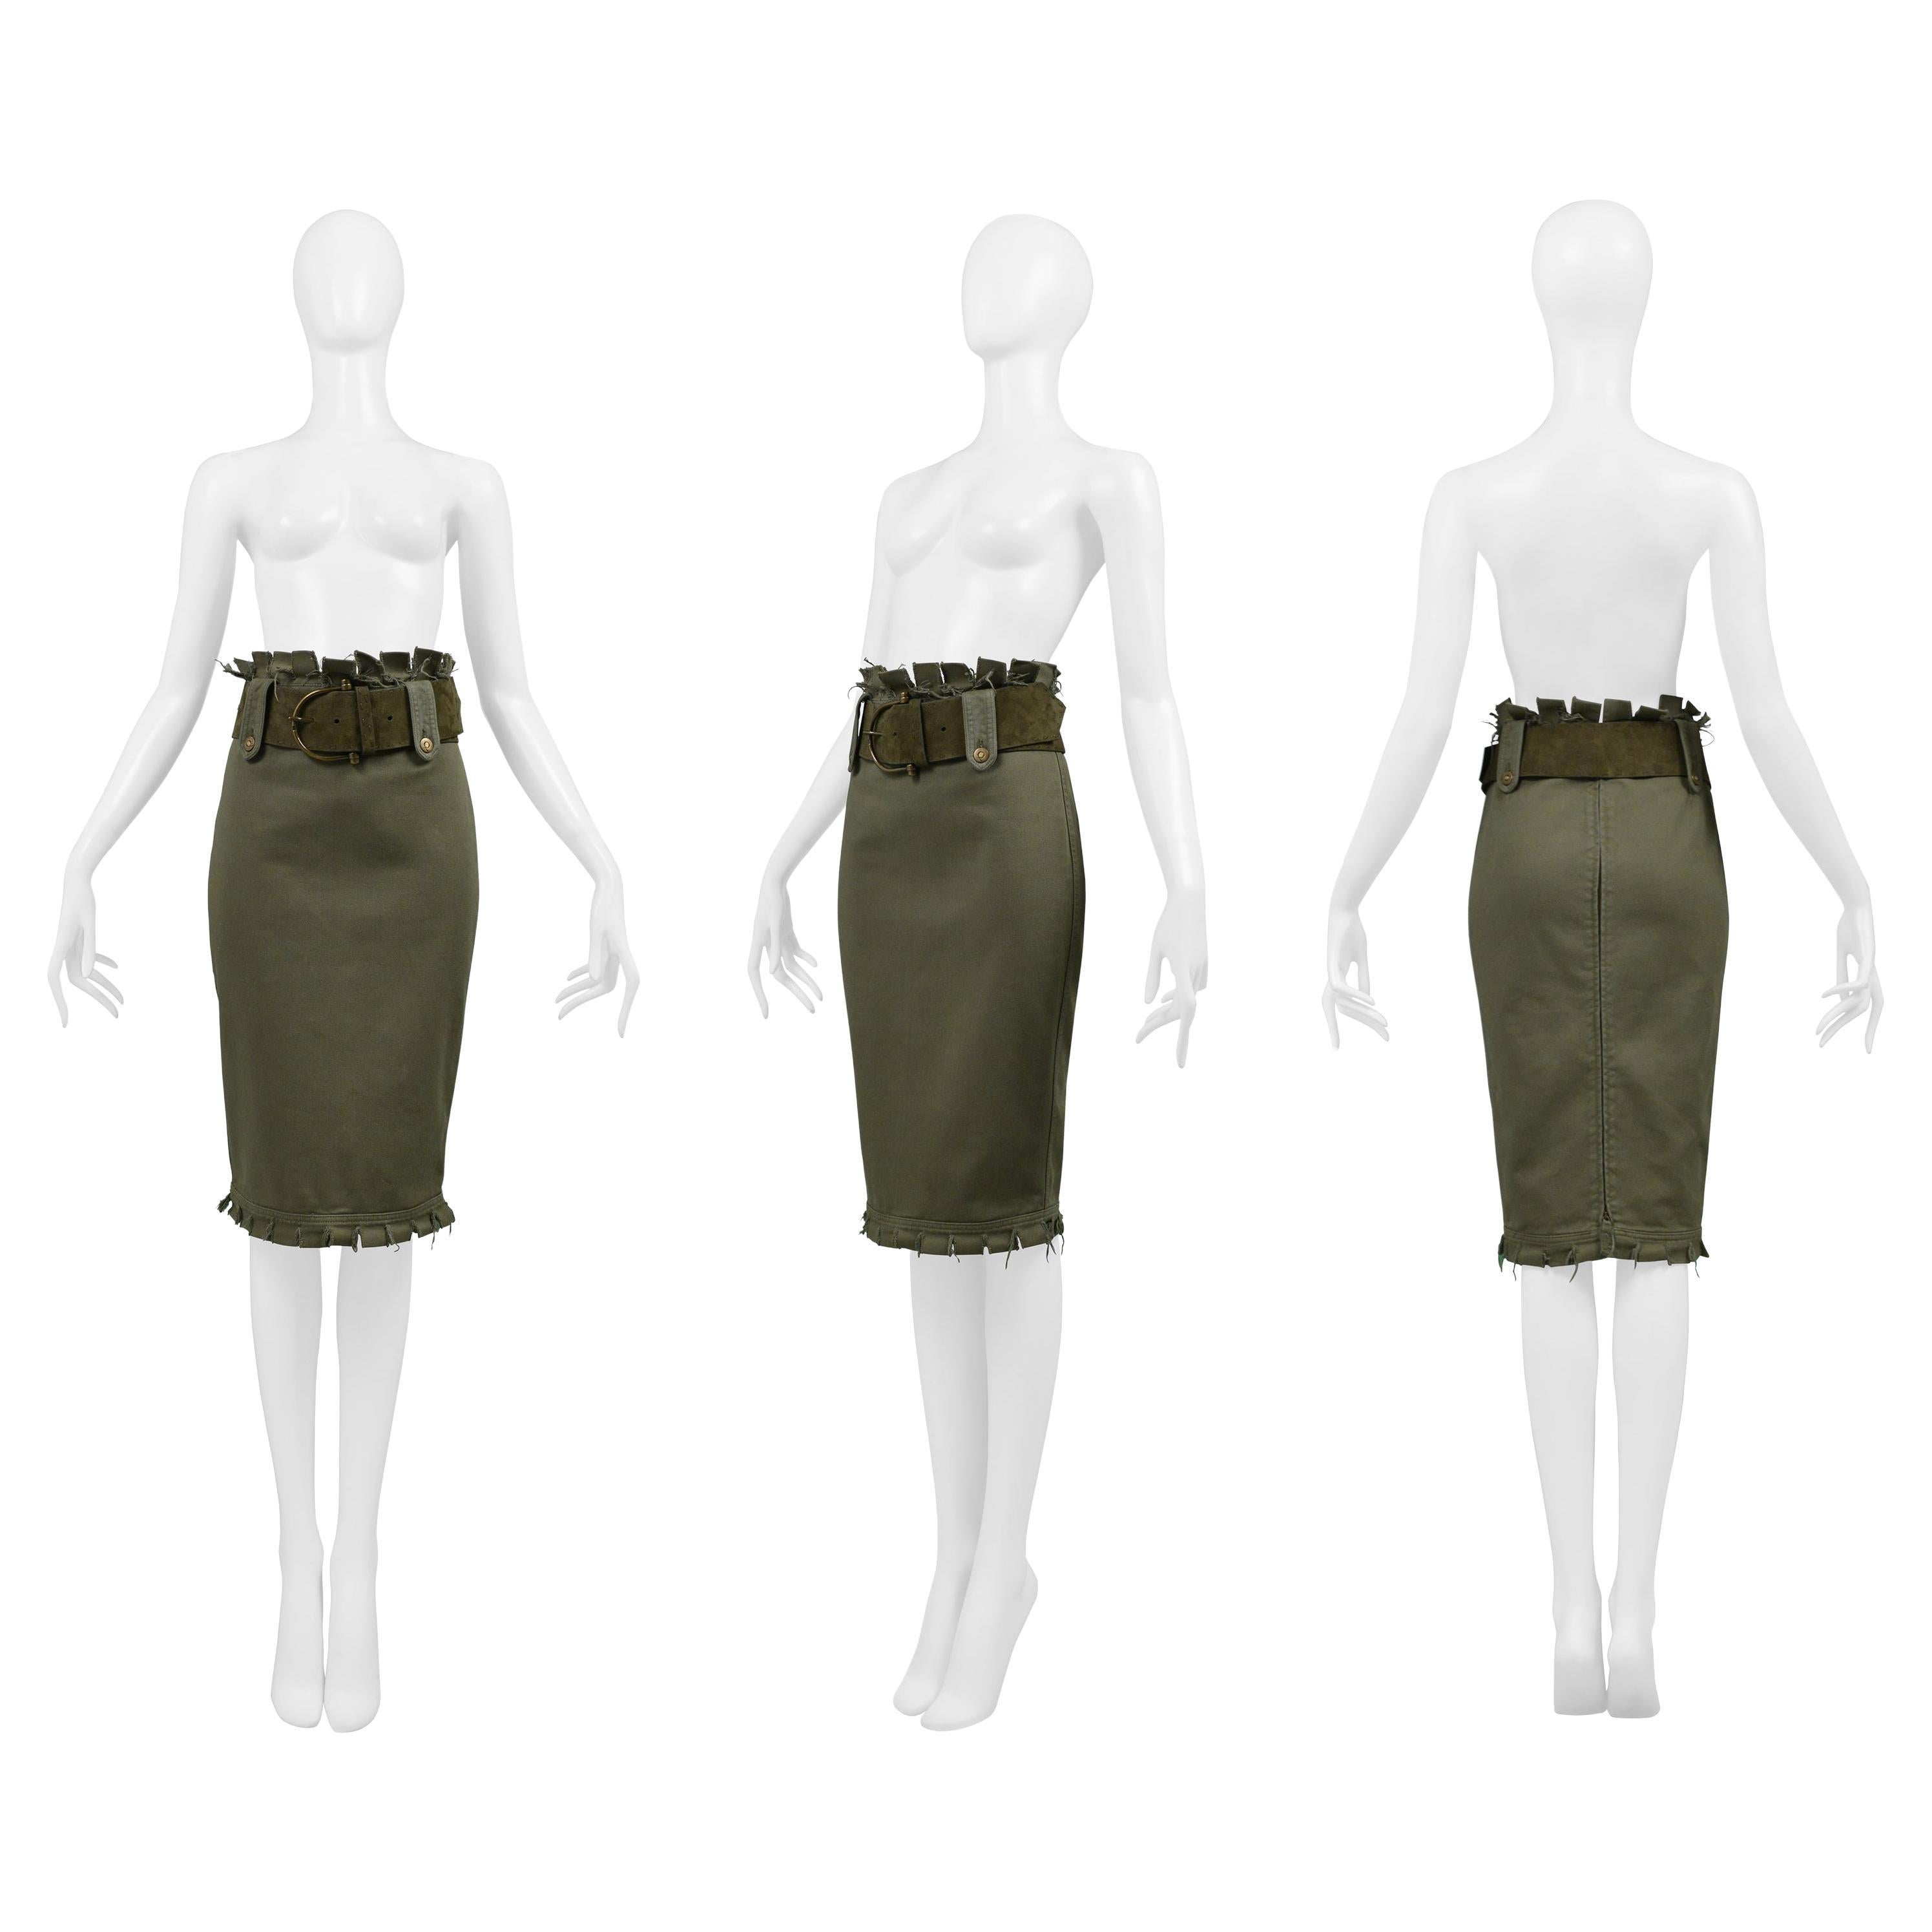 Resurrection Vintage is excited to offer a vintage Alexander McQueen olive green skirt featuring high waistband, wide belt and gold hardware.

Alexander McQueen 
Size IT40
100% Cotton
2003 SS Collection
Excellent Condition Vintage
Authenticity